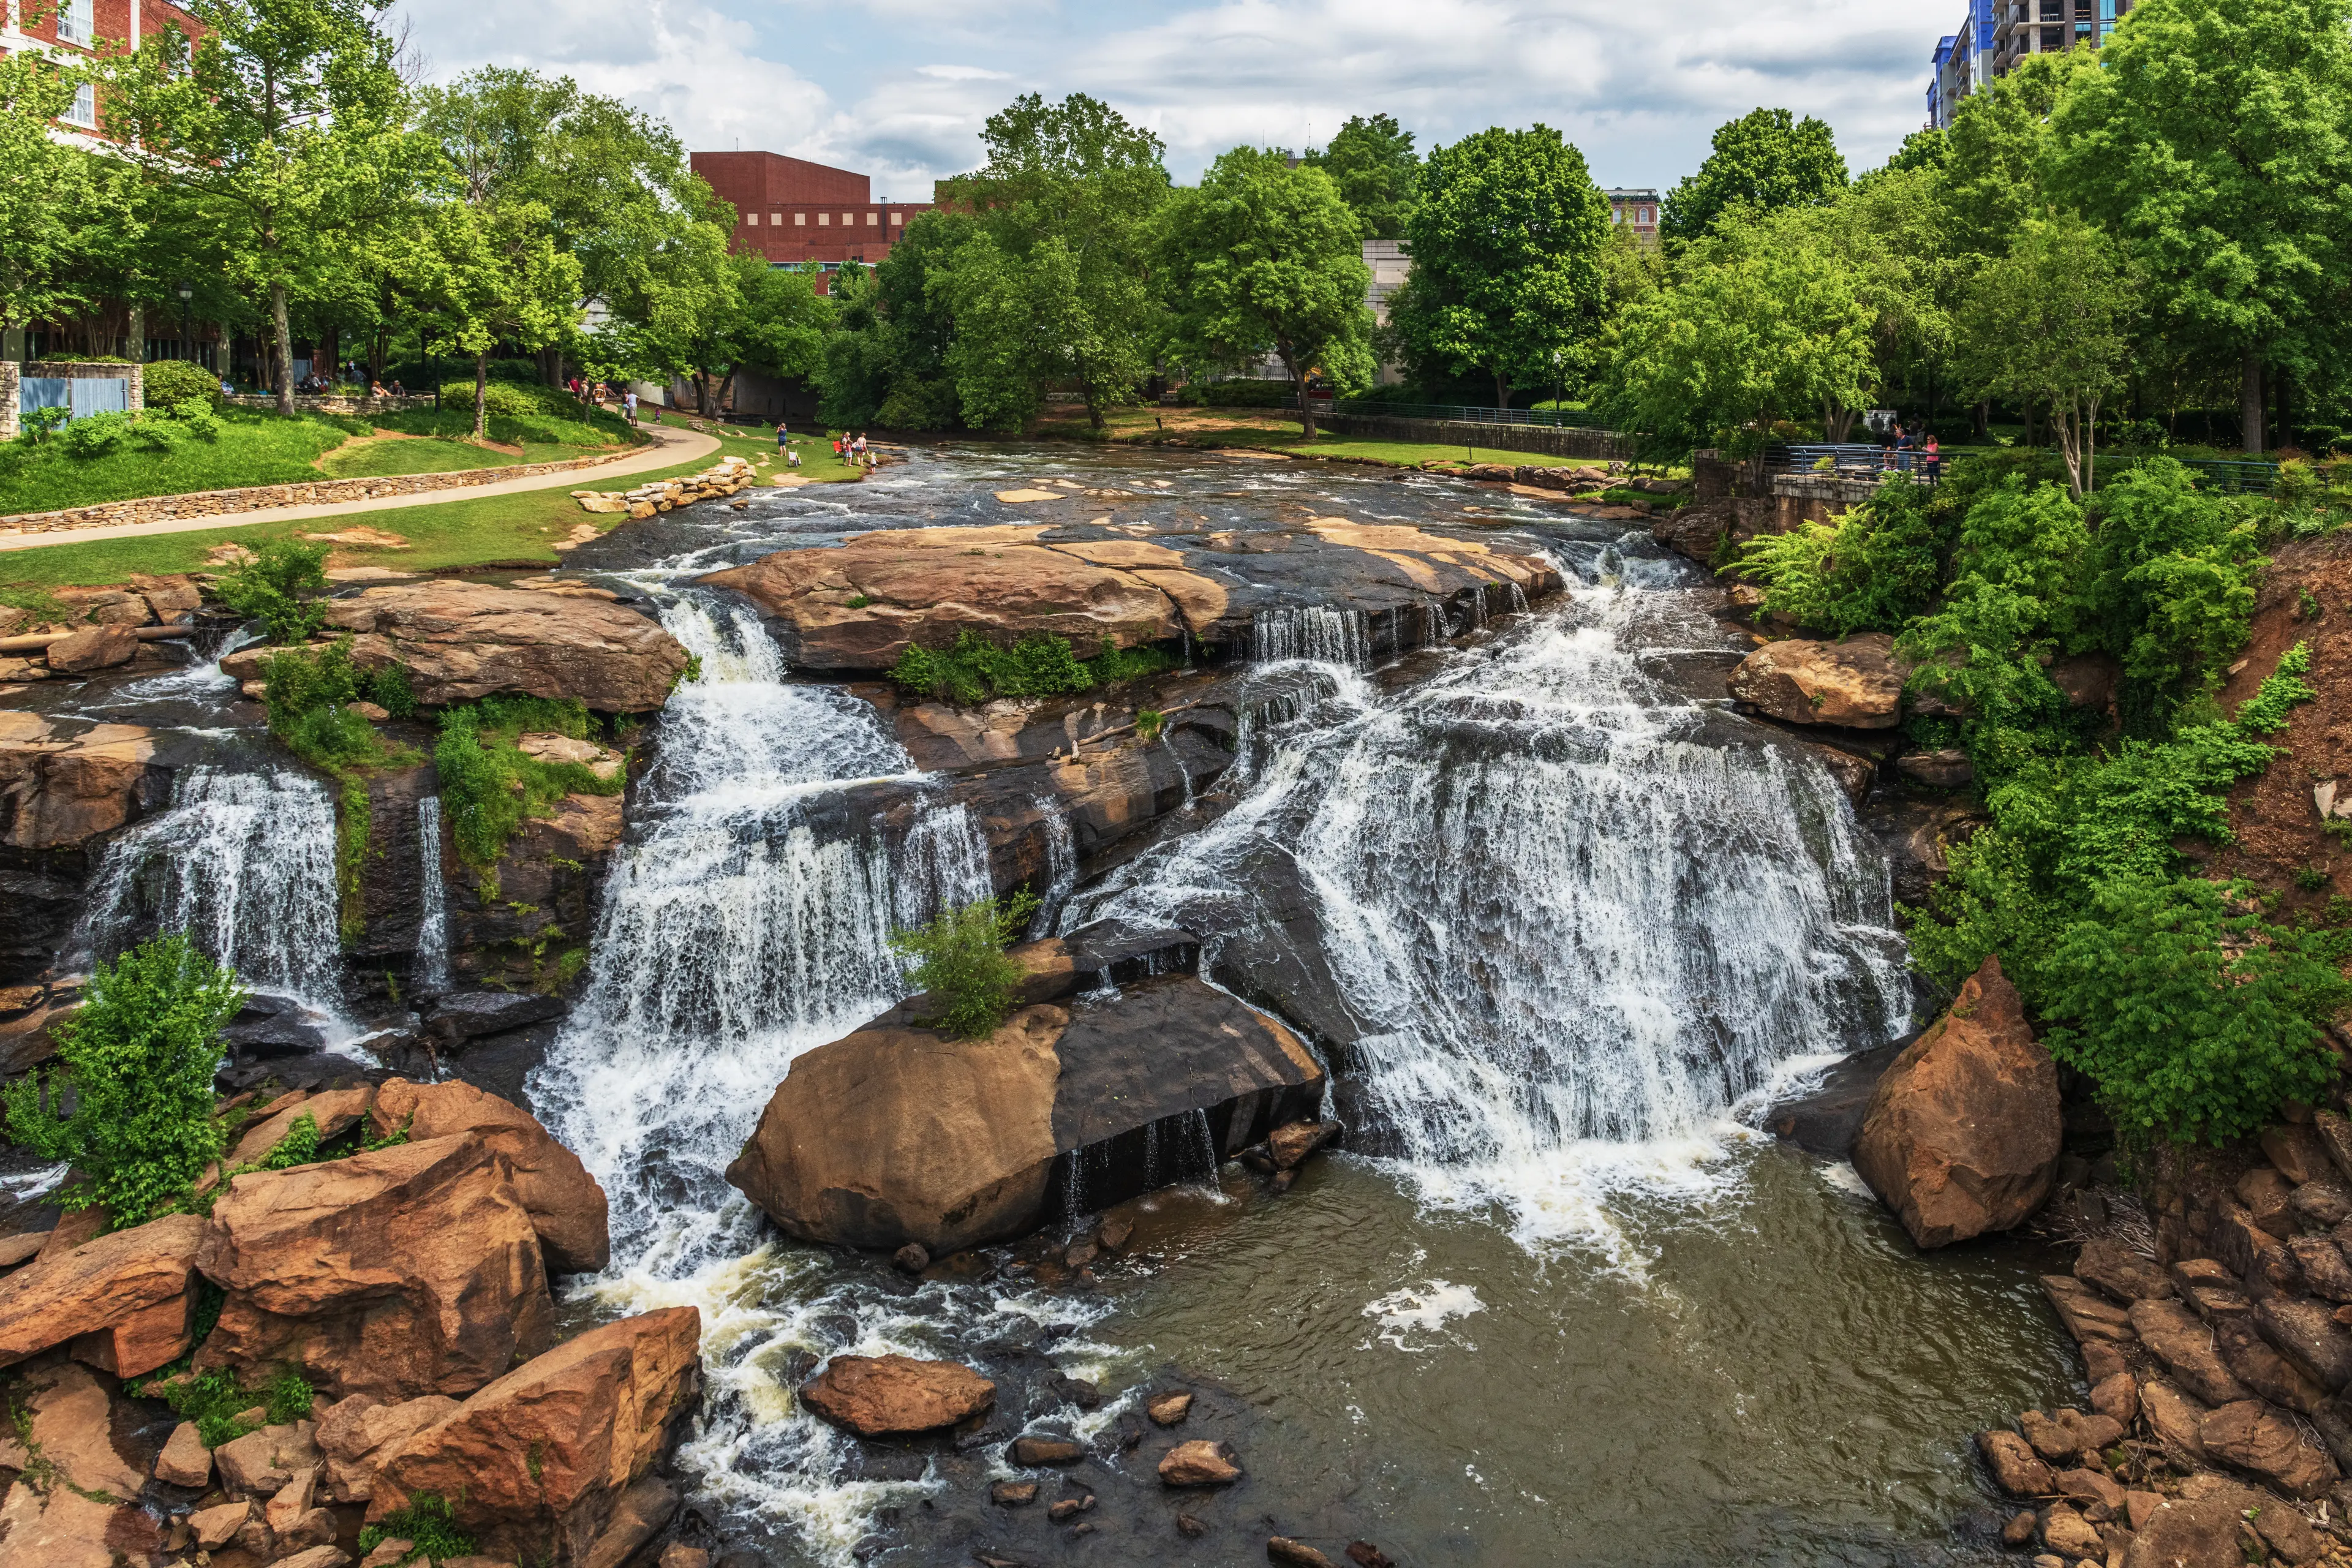 2-Day Shopping Getaway for Locals in Greenville, South Carolina